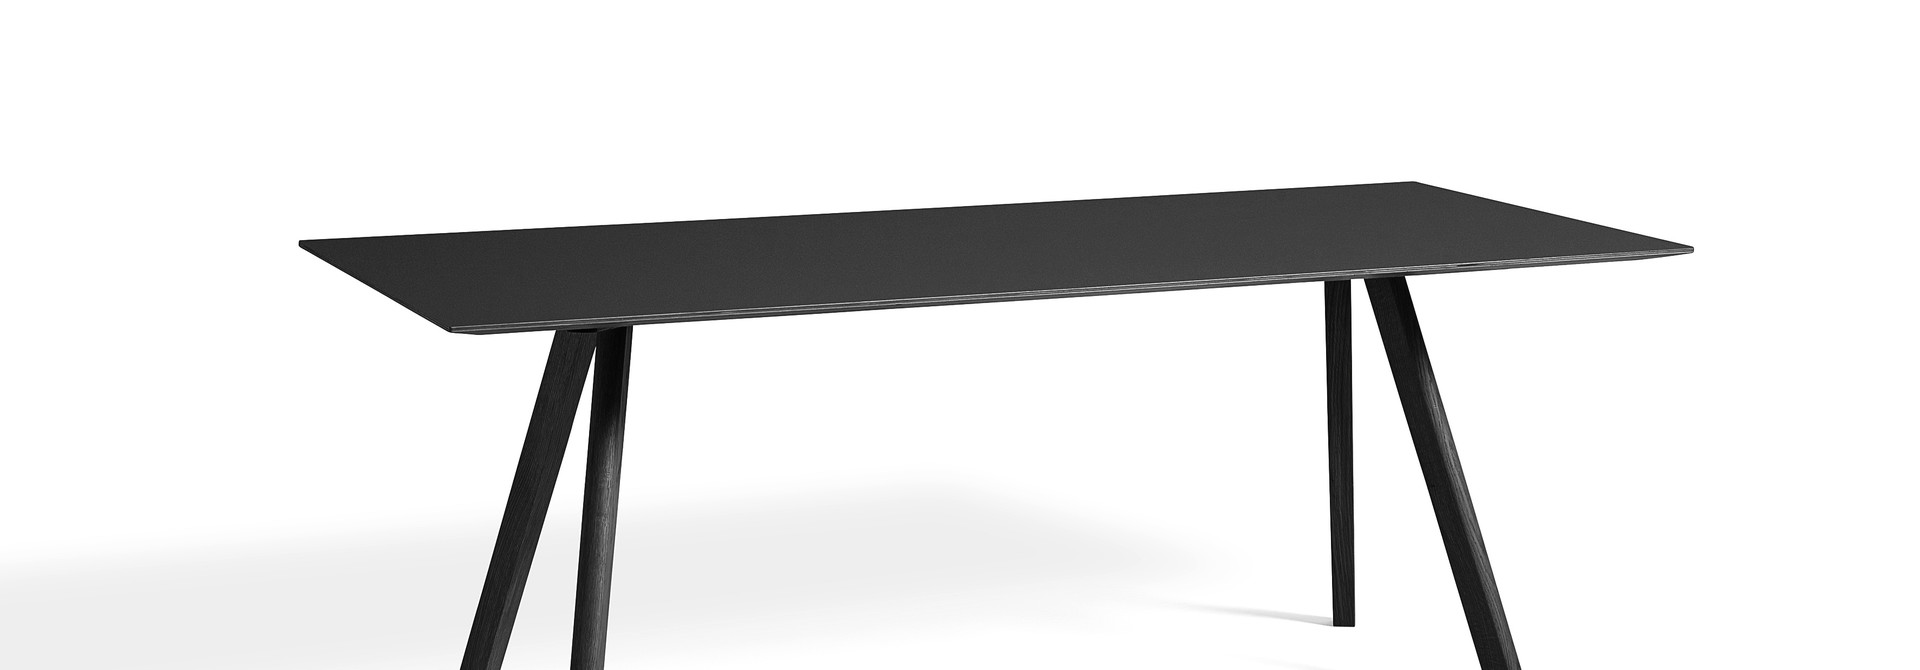 CPH 30 Table - Black water-based lacquered solid oak